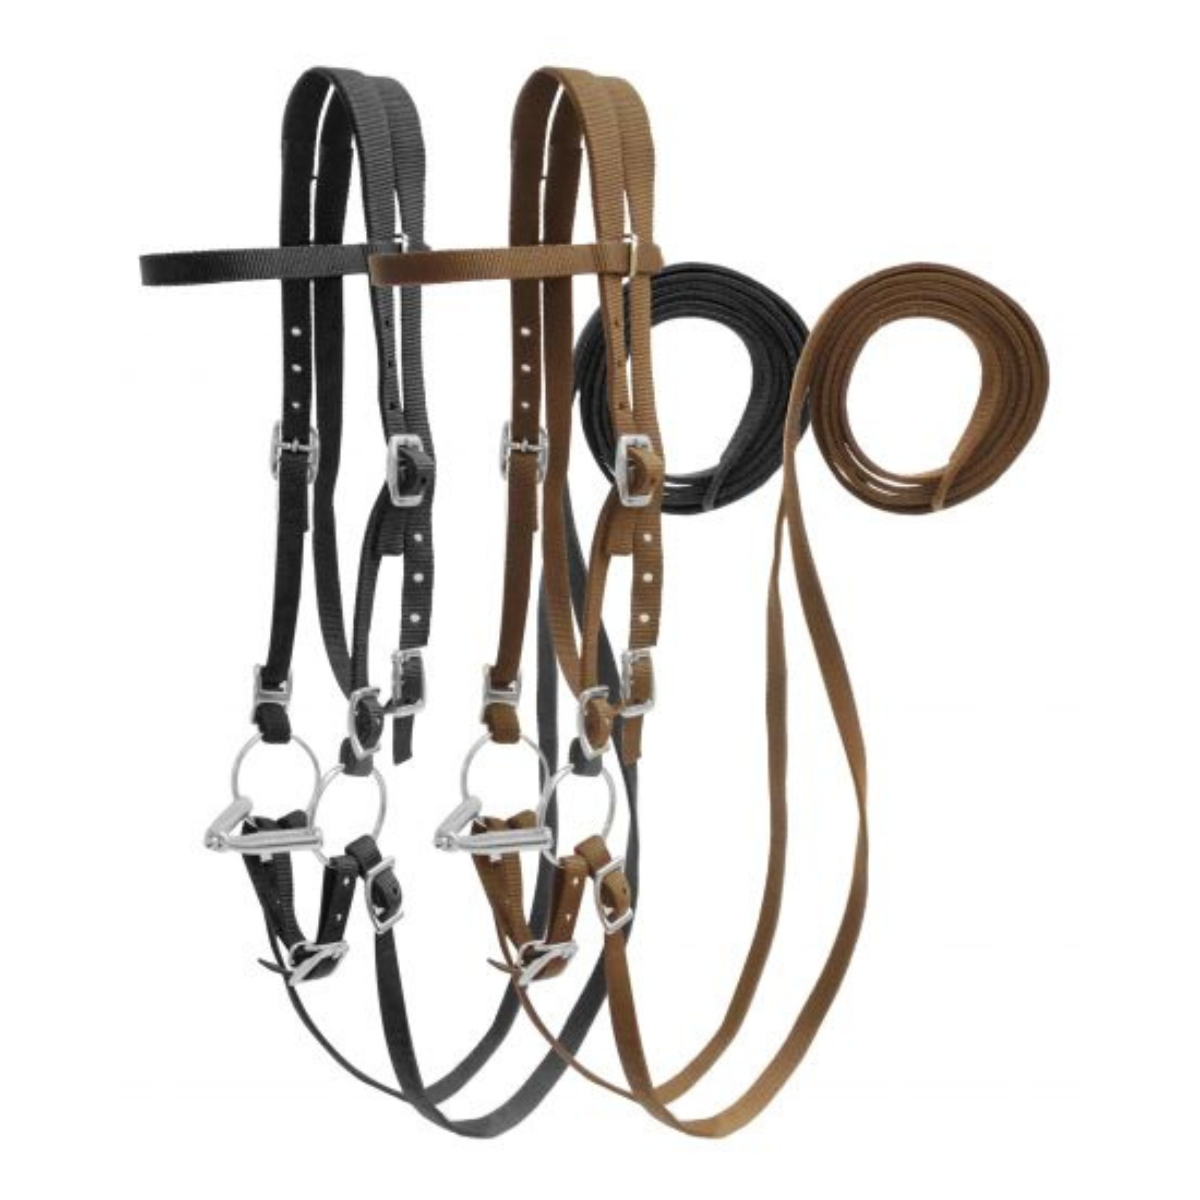 Horse Size nylon headstall with snaffle bit